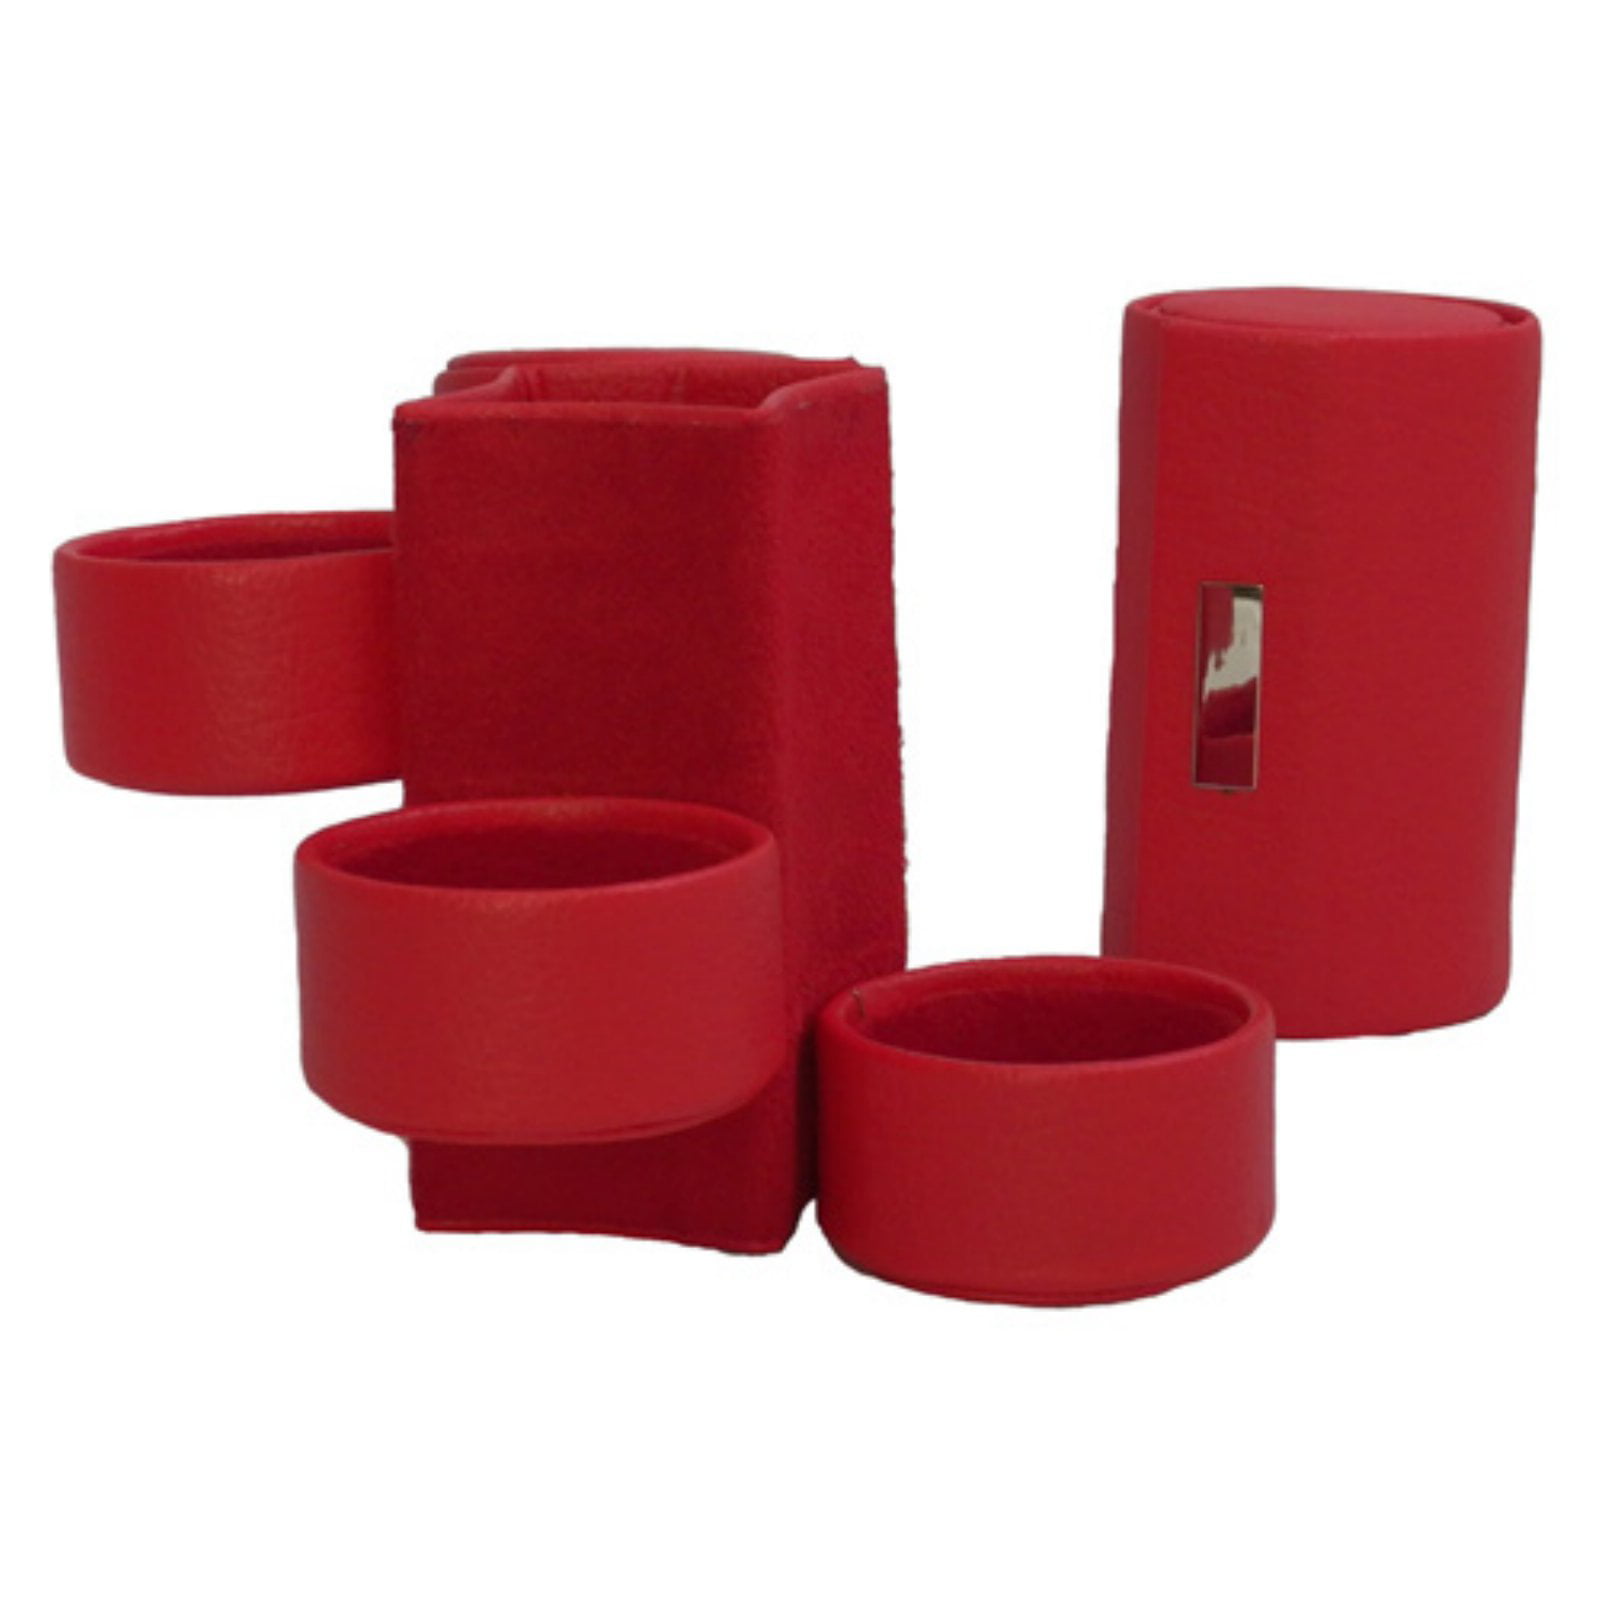 Bey-berk International Bb607red Red Leatherette 3 Level Jewelry Roll With Snap Closure